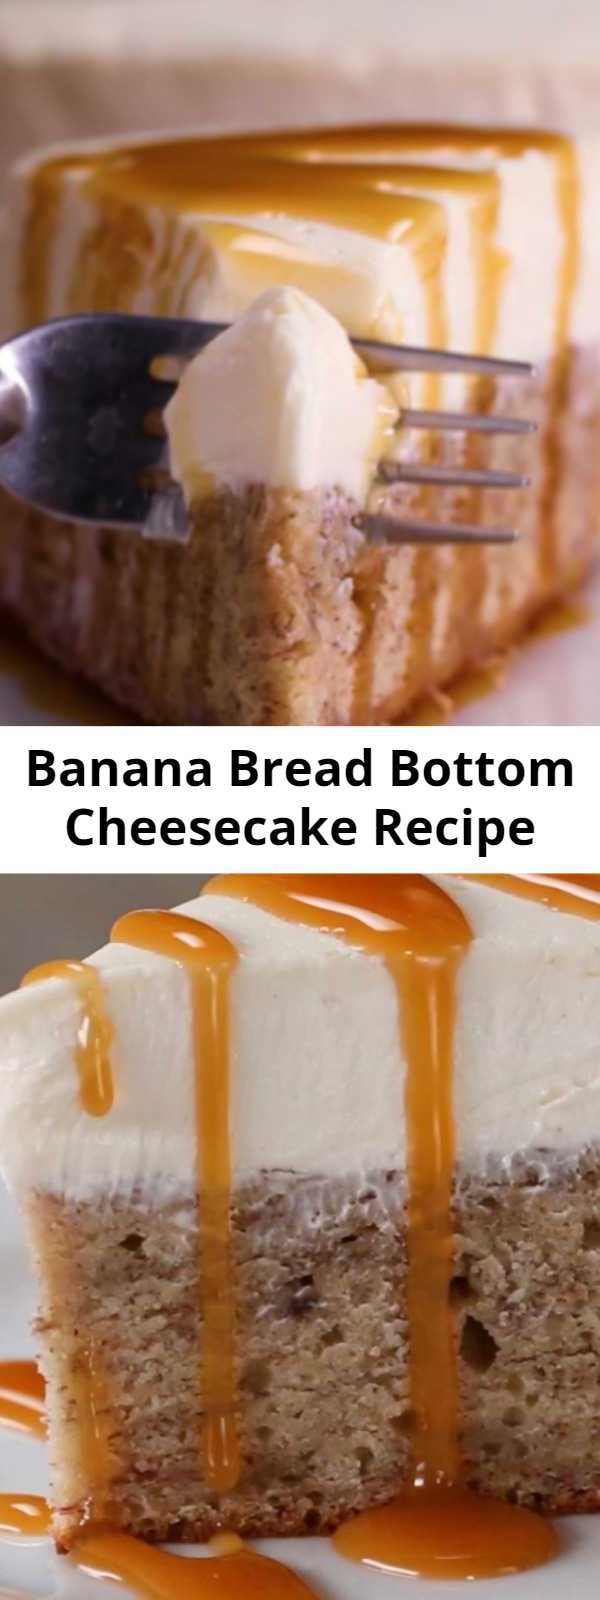 Banana Bread Bottom Cheesecake Recipe - It is soo darn easy to make and holy moly is it decadent and rich.  The banana bread layer smelled absolutely heavenly baking and turned out sooo moist and delicious, and the cheesecake layer couldn’t have been more creamy or easy to make.